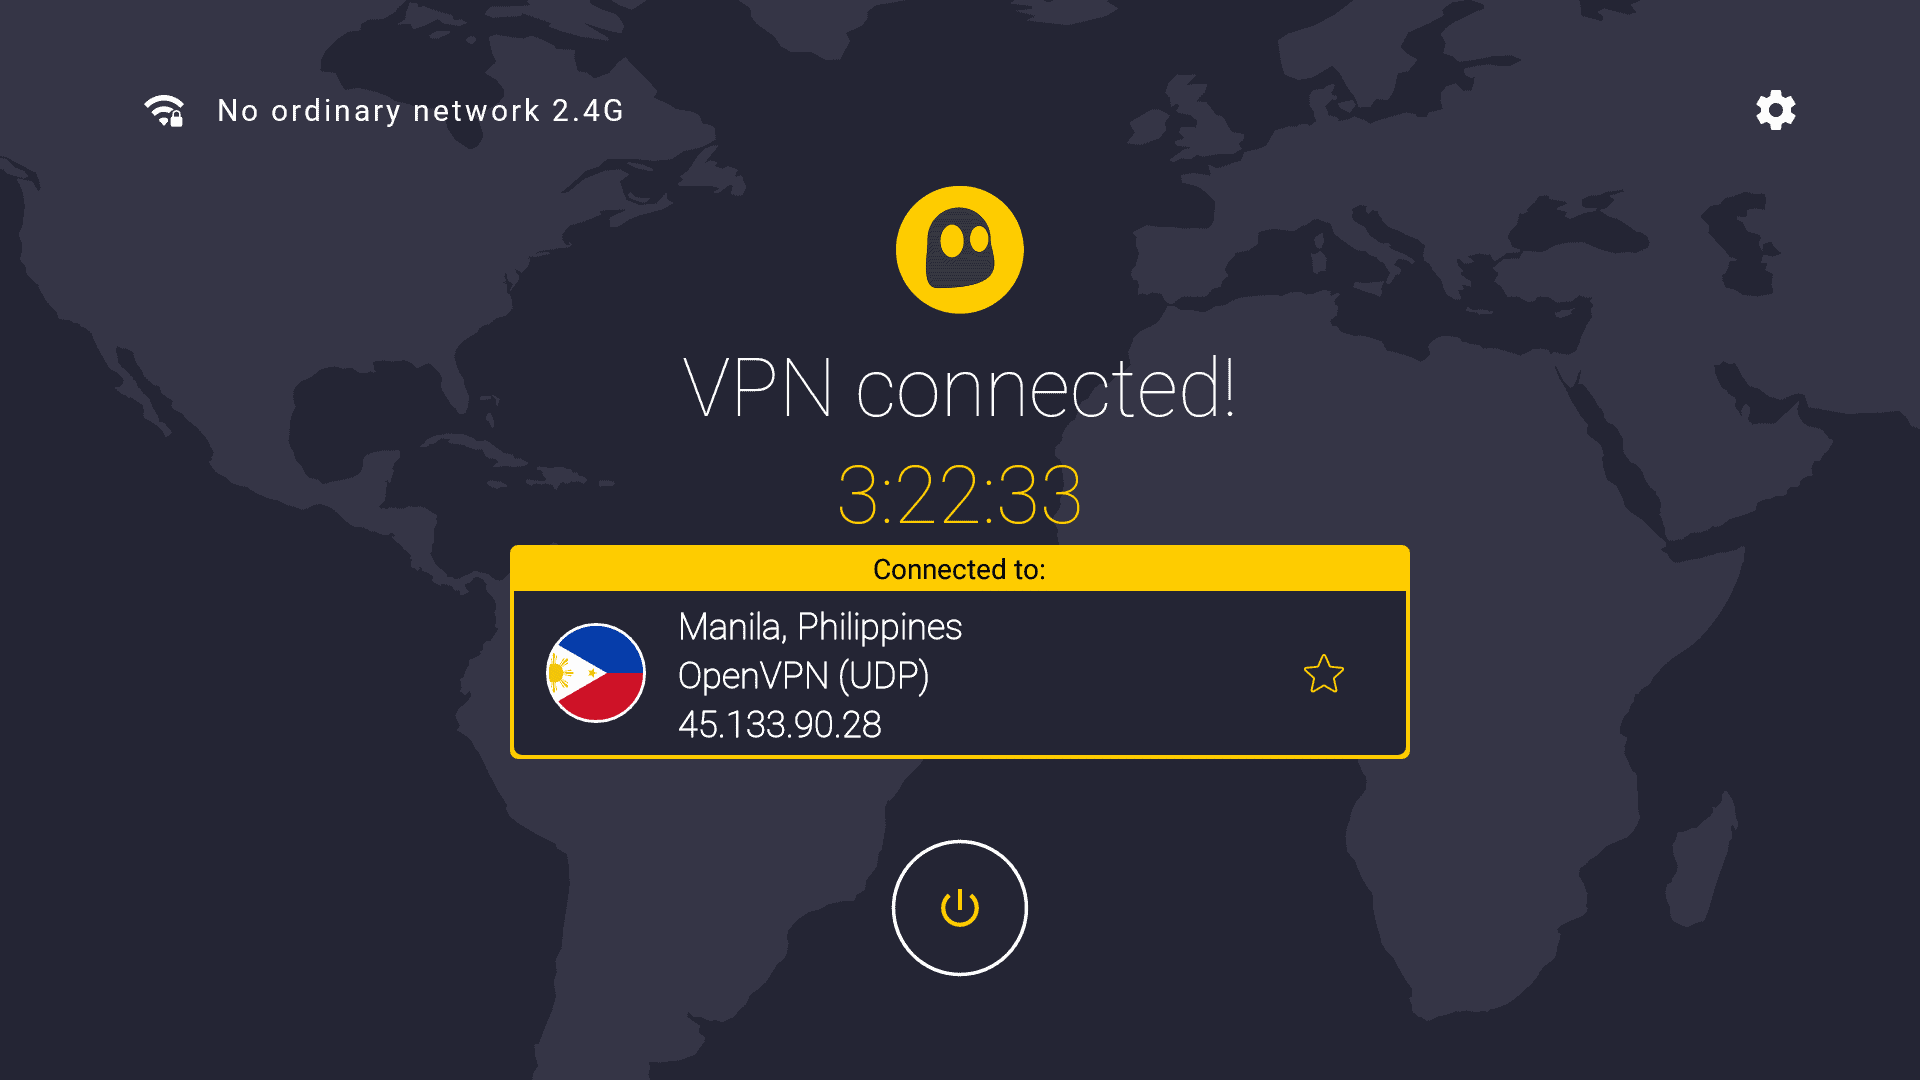 Connected to CyberGhost VPN